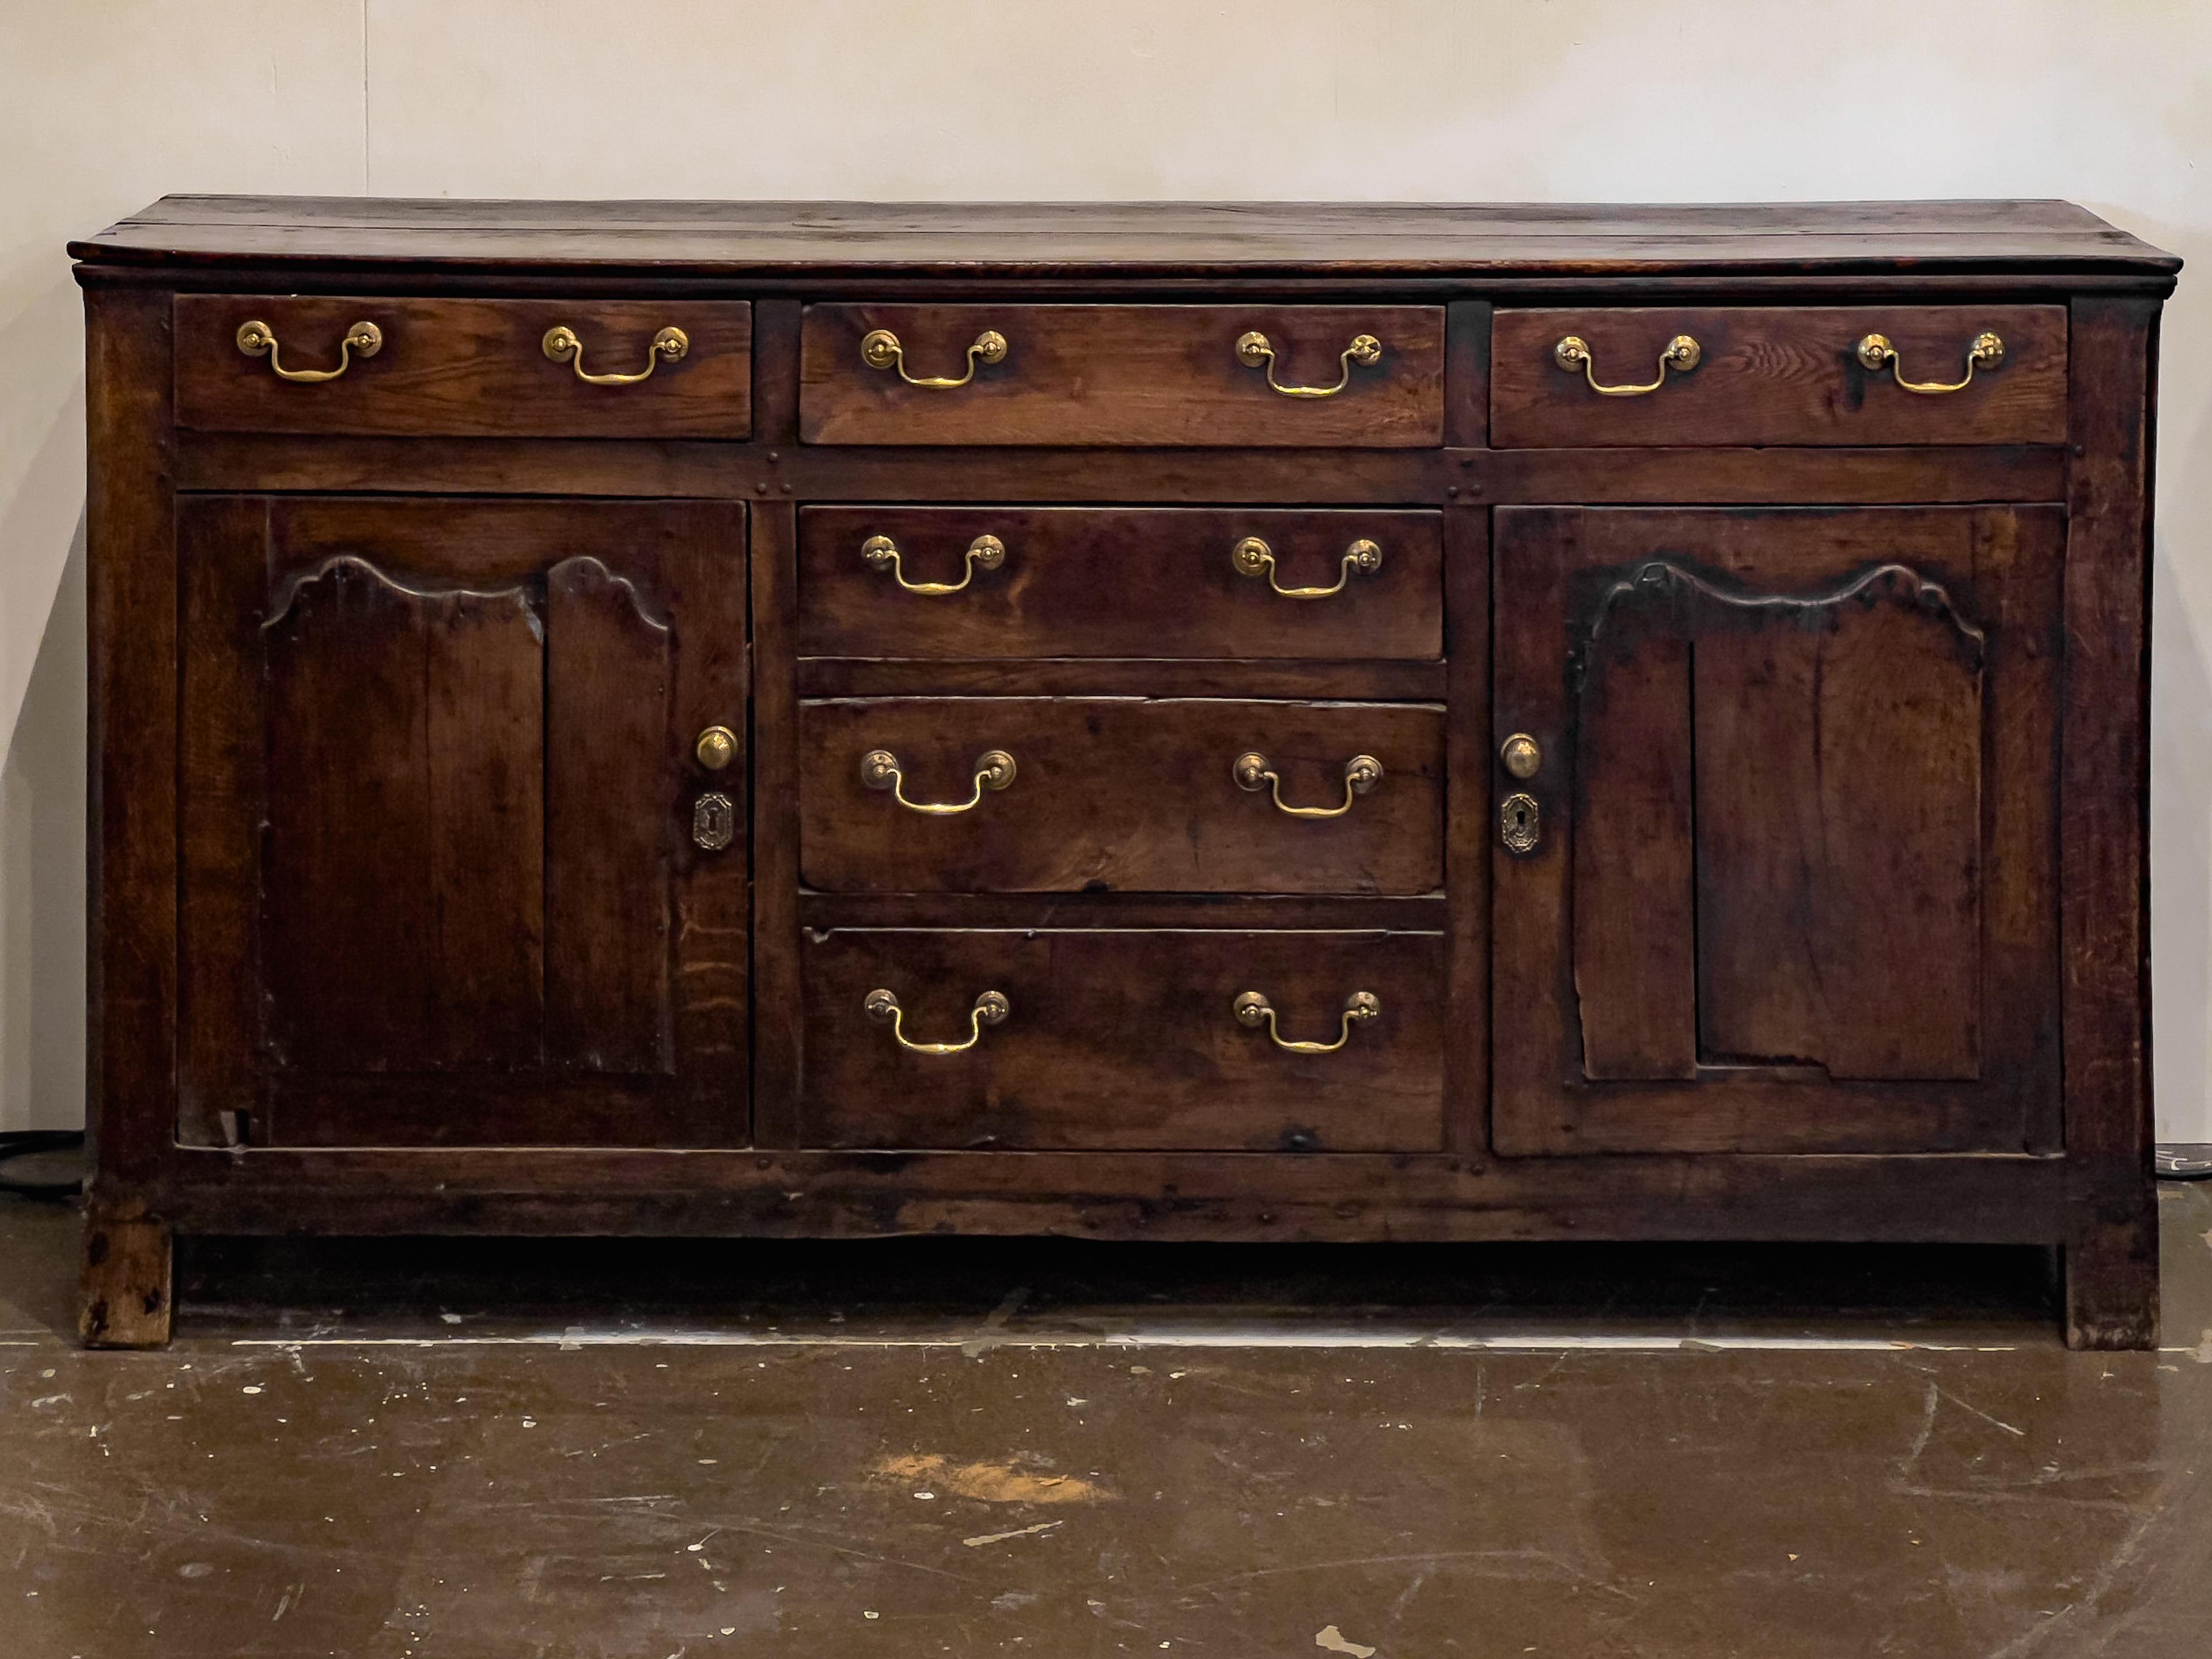 18th century English oak dresser with two doors and four functional drawers (two false drawers on the bottom) with drop bail hardware.